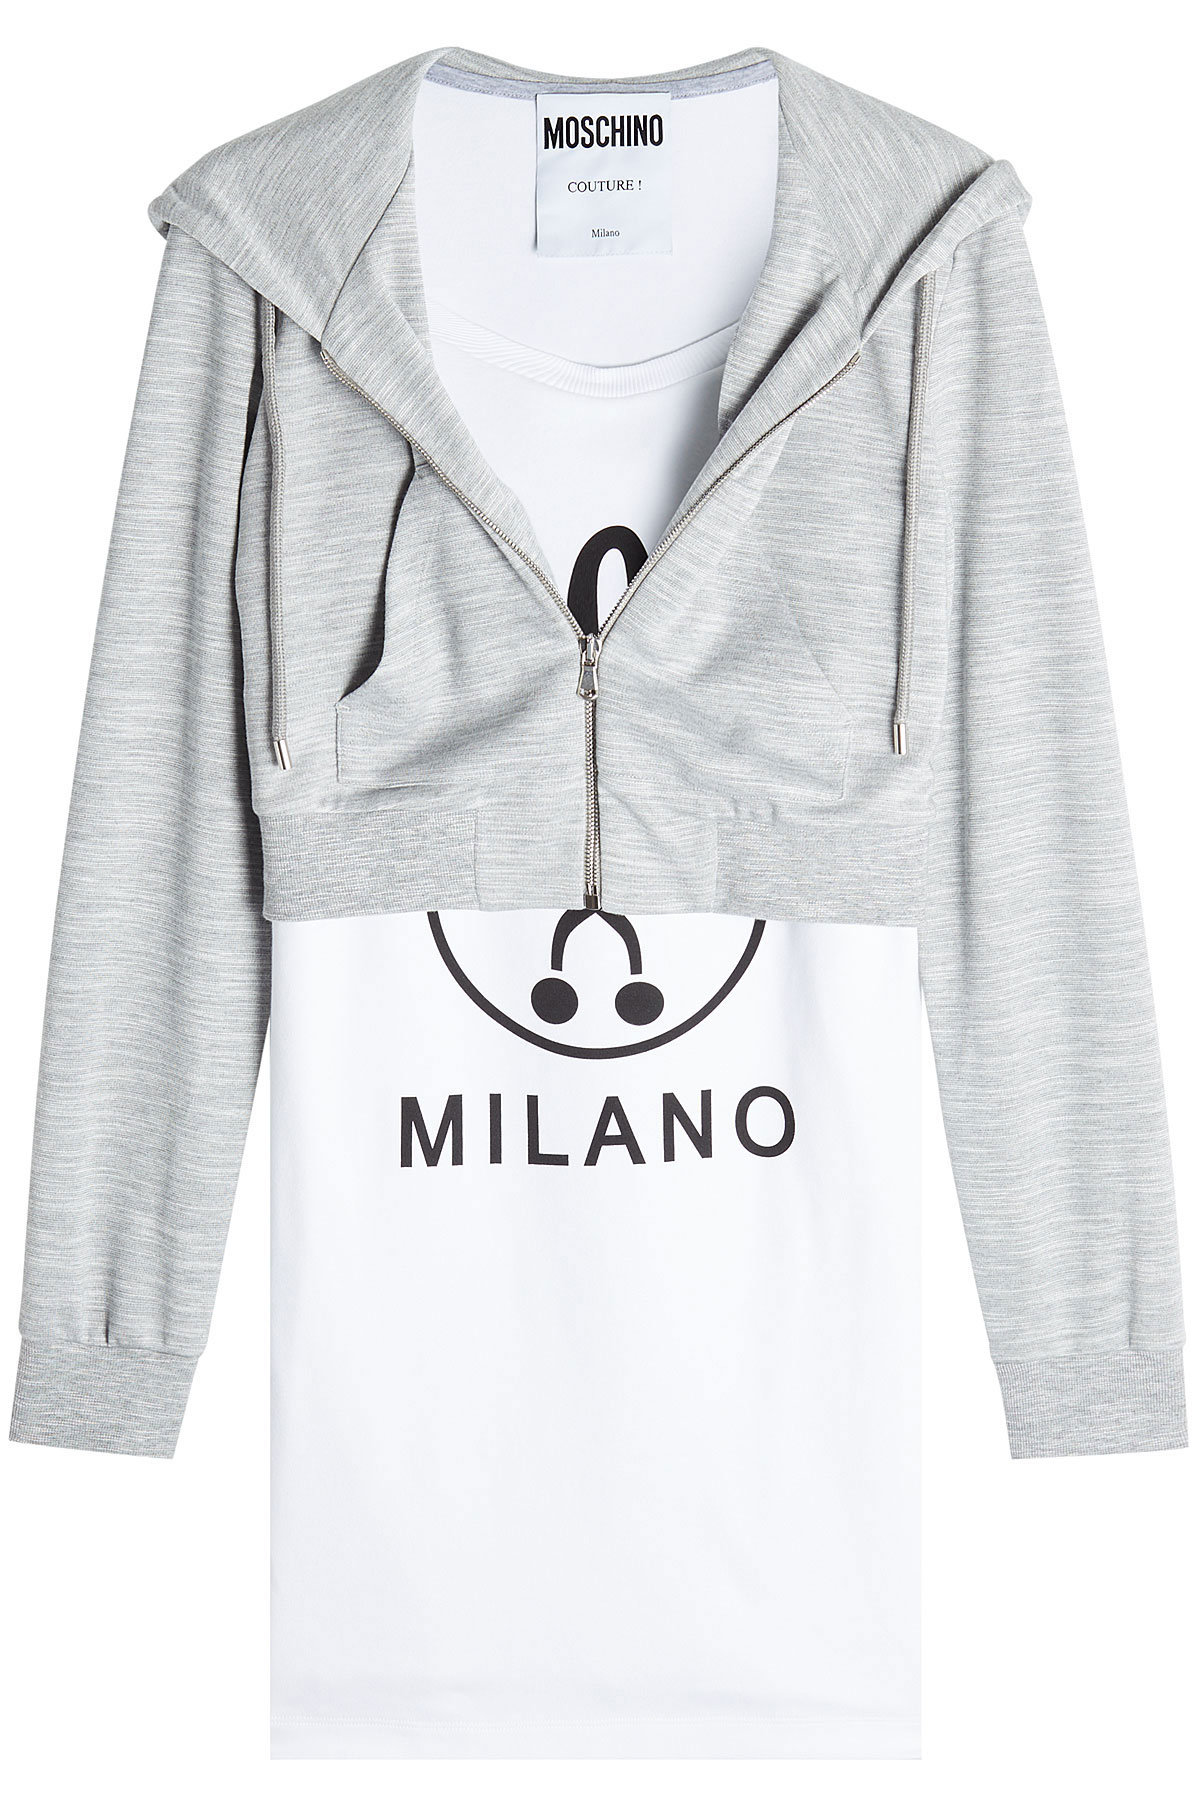 Moschino - Cotton Hoody and T-Shirt Top